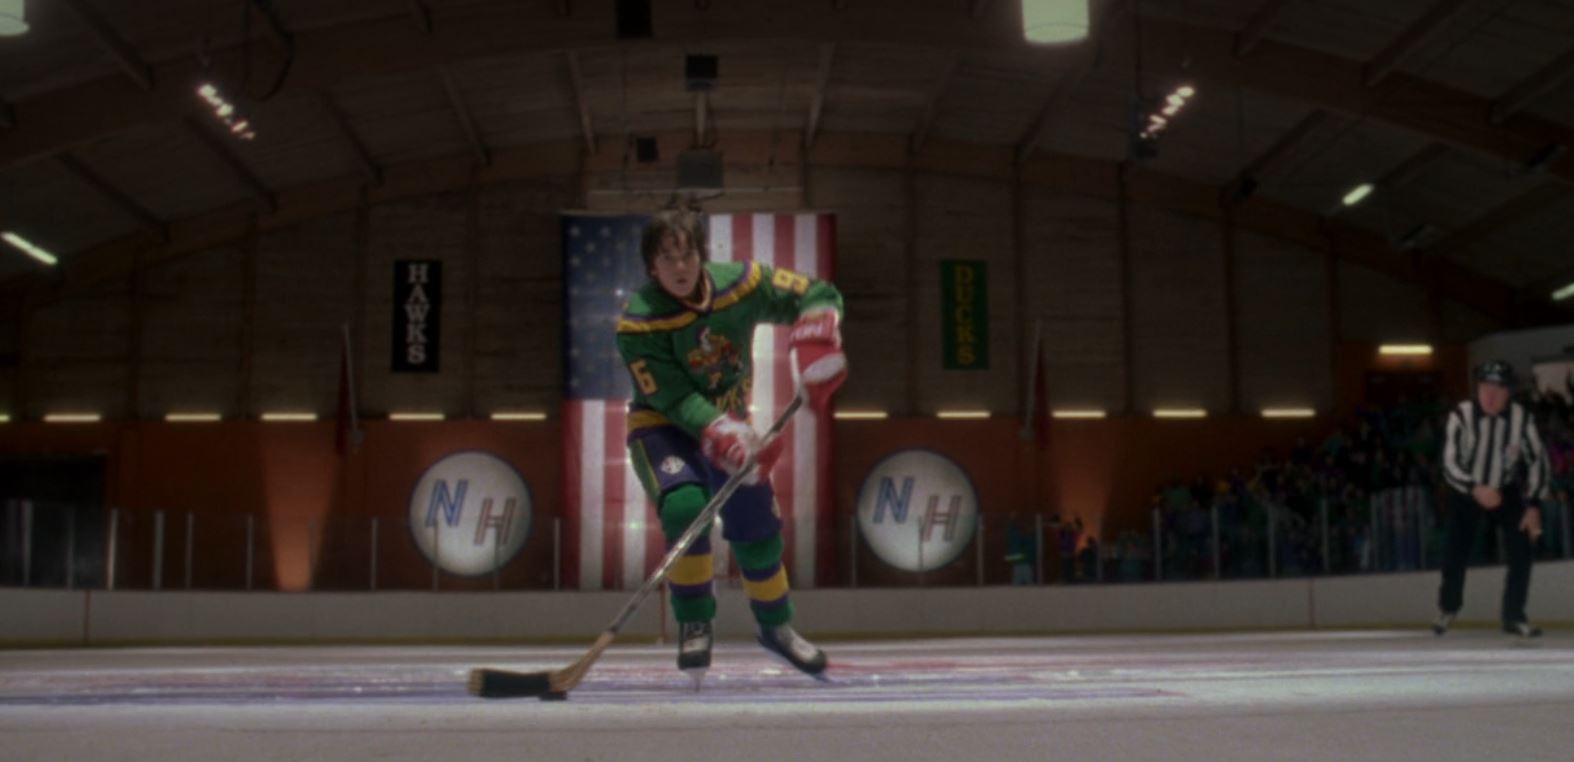 The Mighty Ducks: Game team Changers - The Quack Attack Podcast